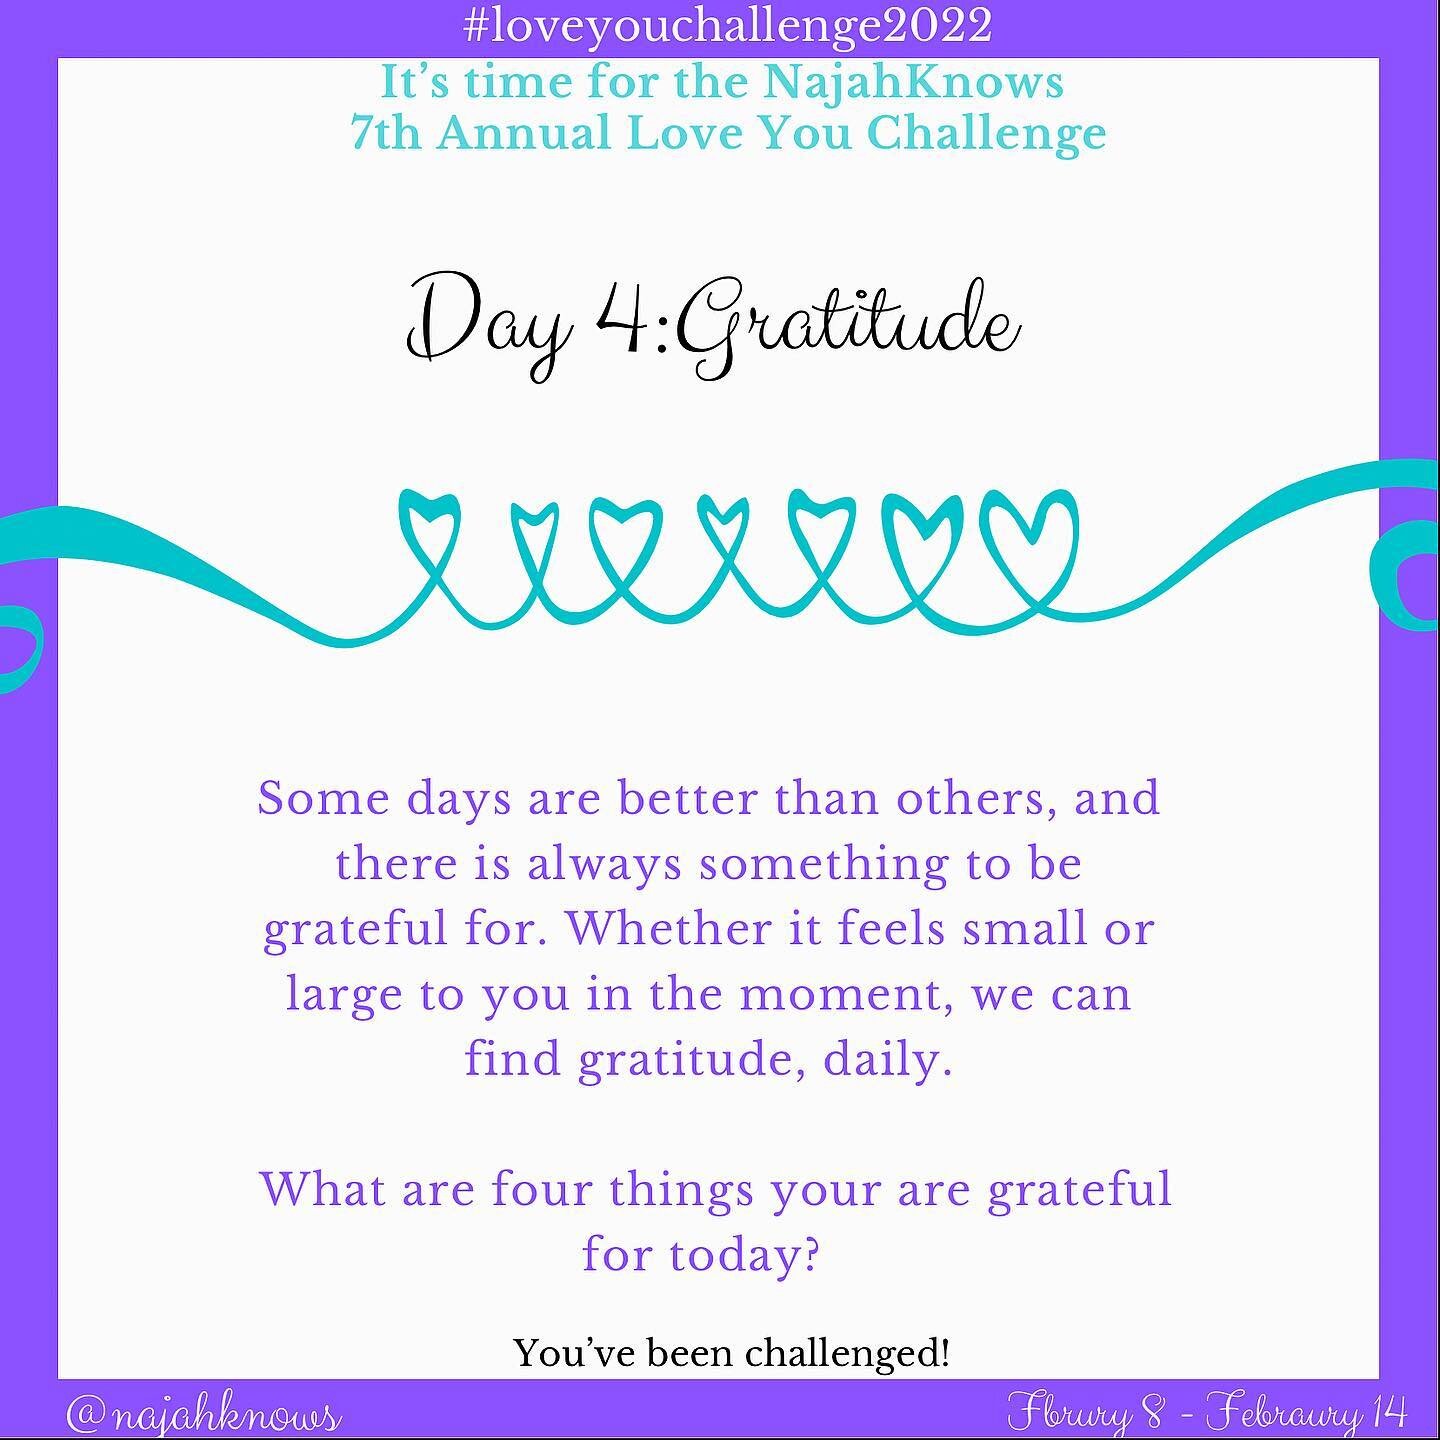 Love You Challenge &lsquo;22: Day Four: Gratitude. As I write this, I inhale and think &ldquo;man&hellip; life really has a way of getting tough sometimes,&rdquo; and as I exhale I feel relief and gratitude, because through it all, I have my breath, 